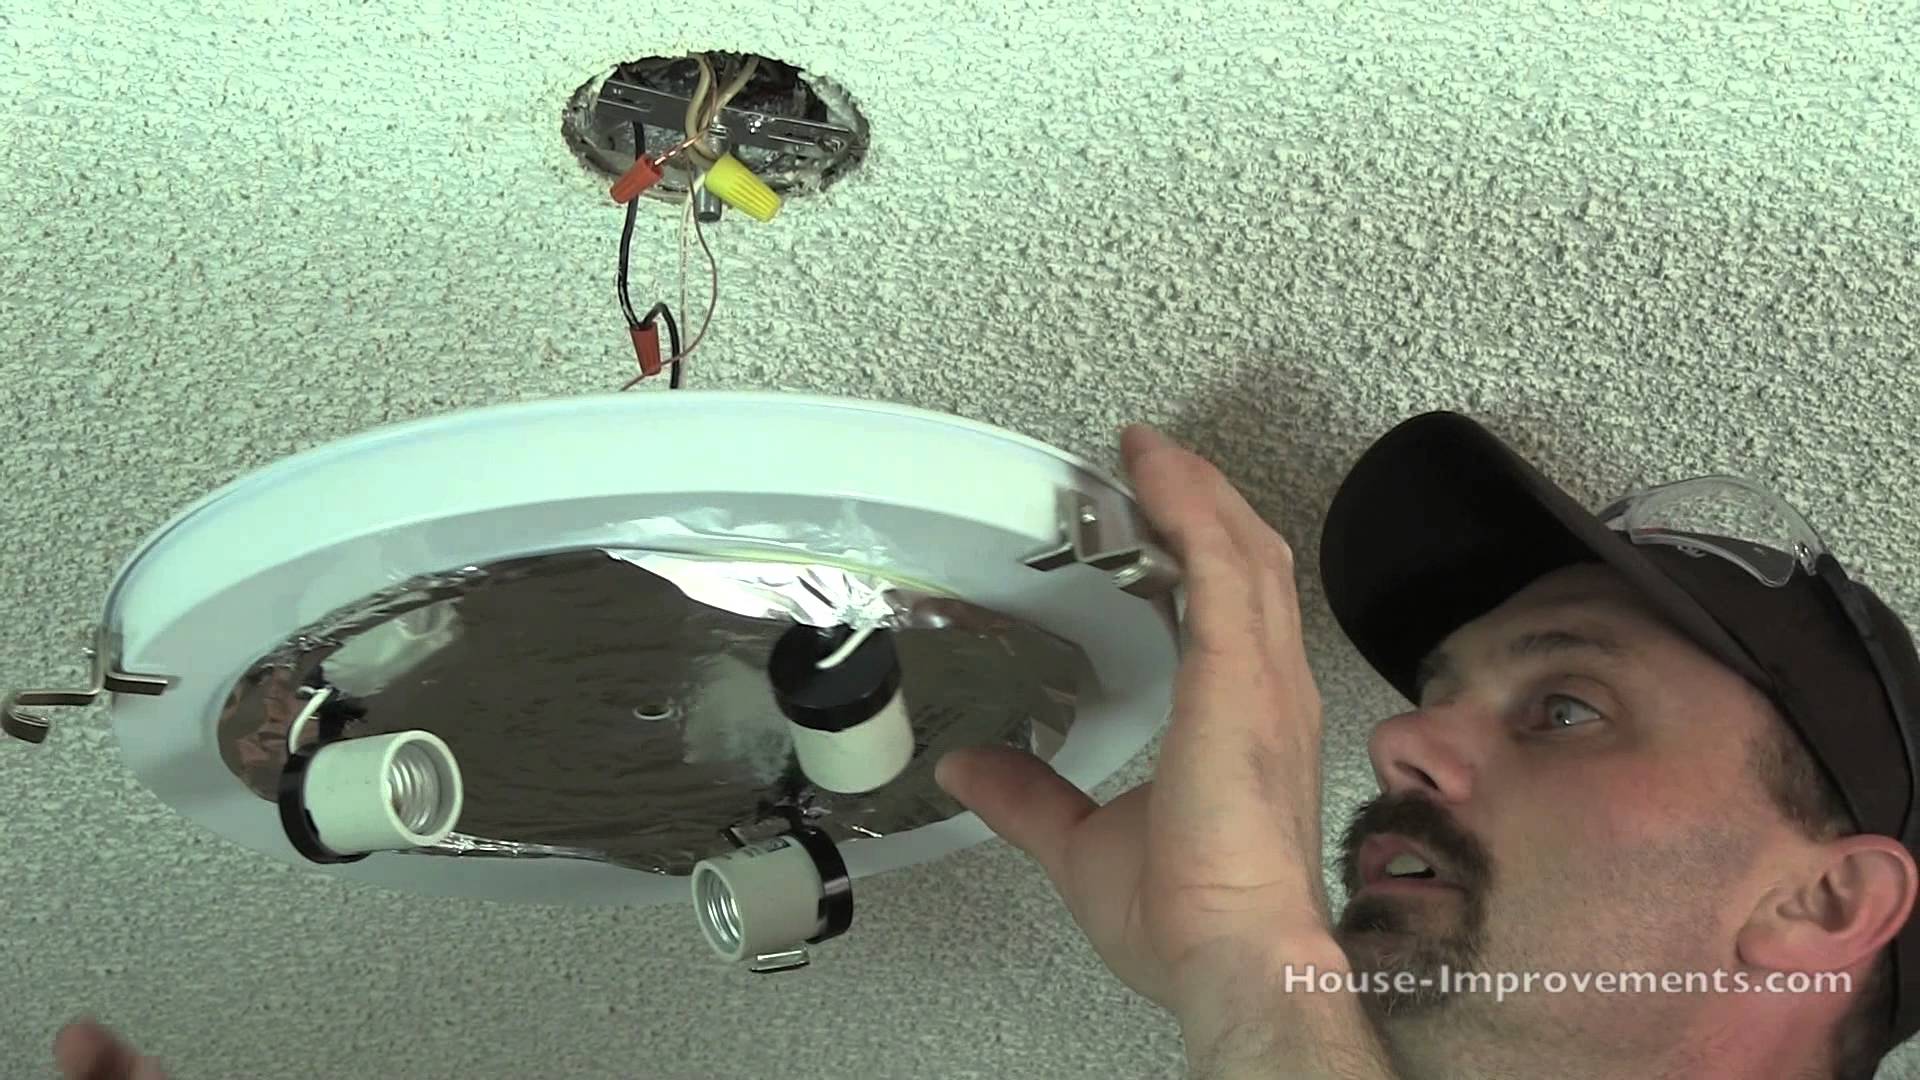 How To Replace A Ceiling Light Fixture - YouTube